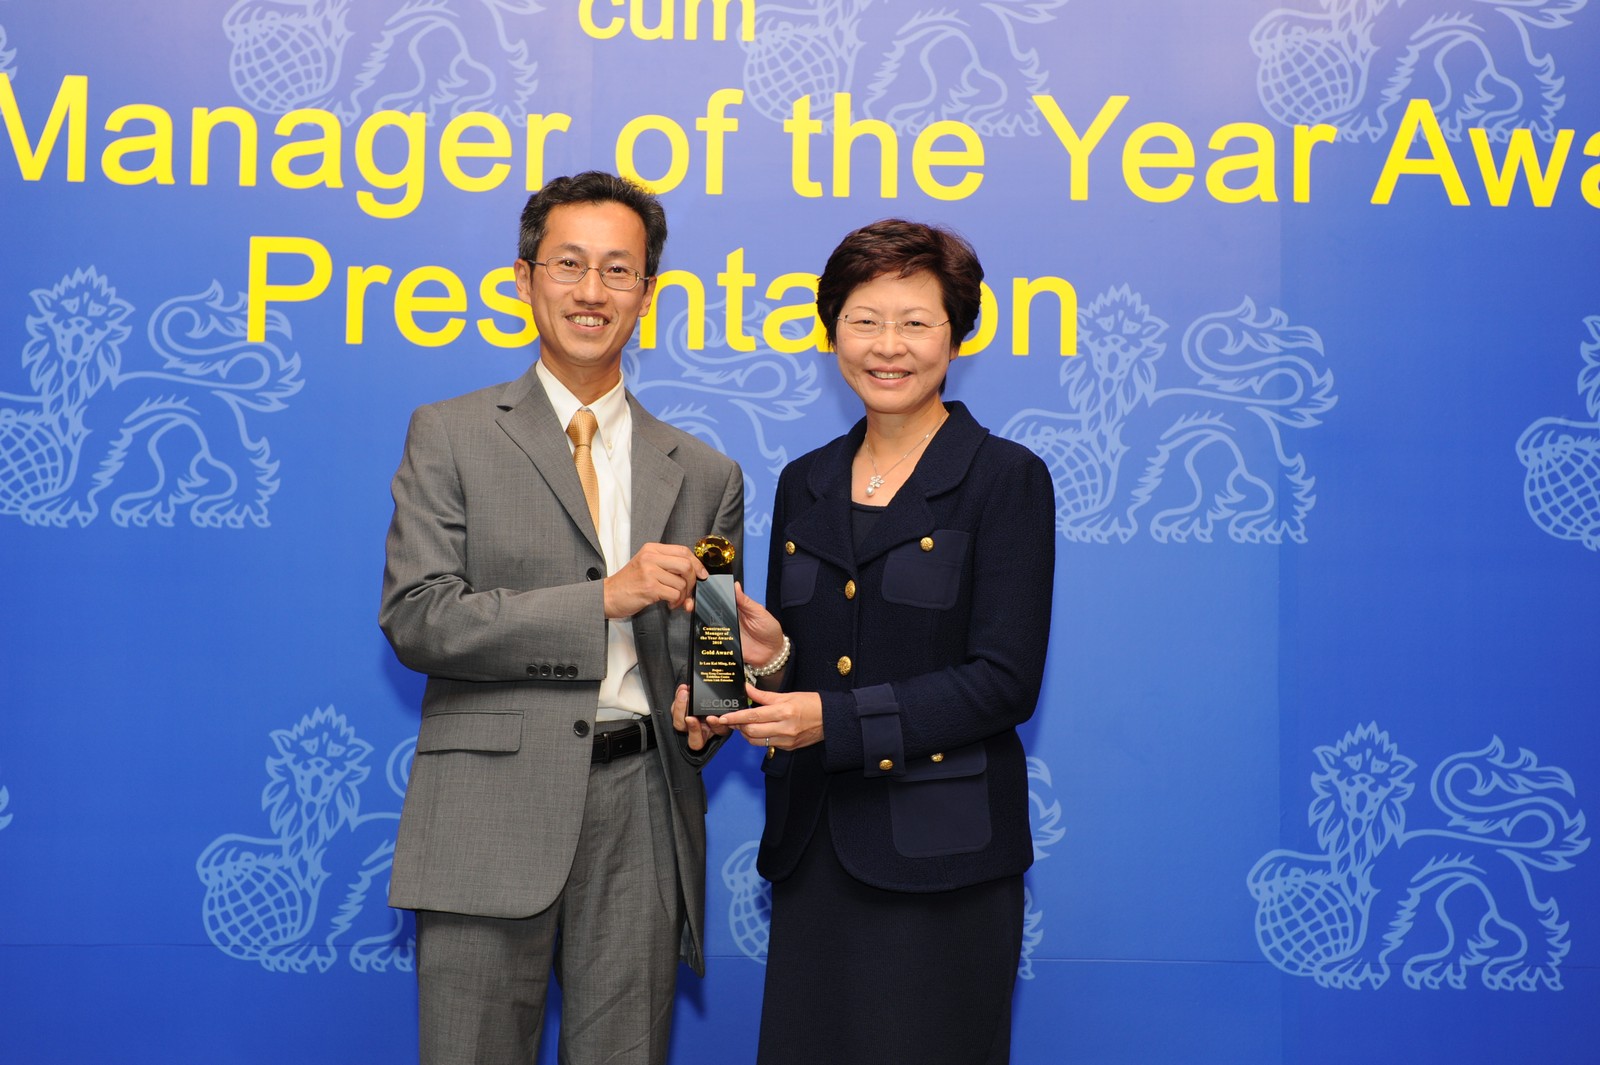 Mr Eric Lau wins the Gold Award at Construction Manager of the Year 2010